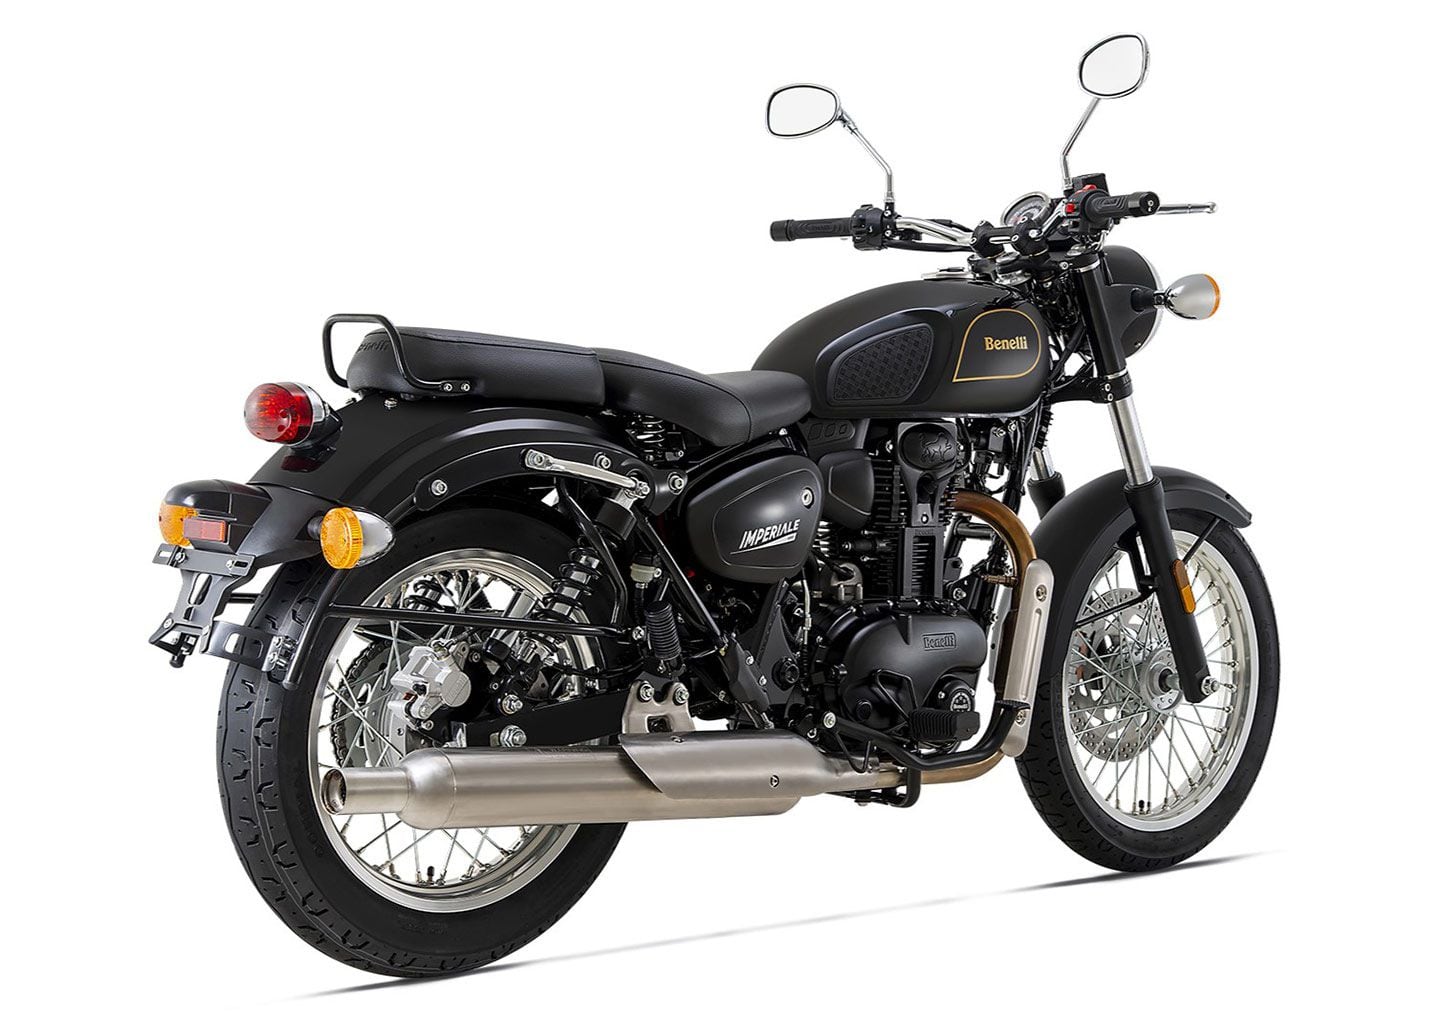 The current Imperiale’s retro vibe channels the Benelli-Motobi Imperiale models of the 1950s, with wire-spoked wheels, tank pads, exposed dual shocks, and bulb indicators.